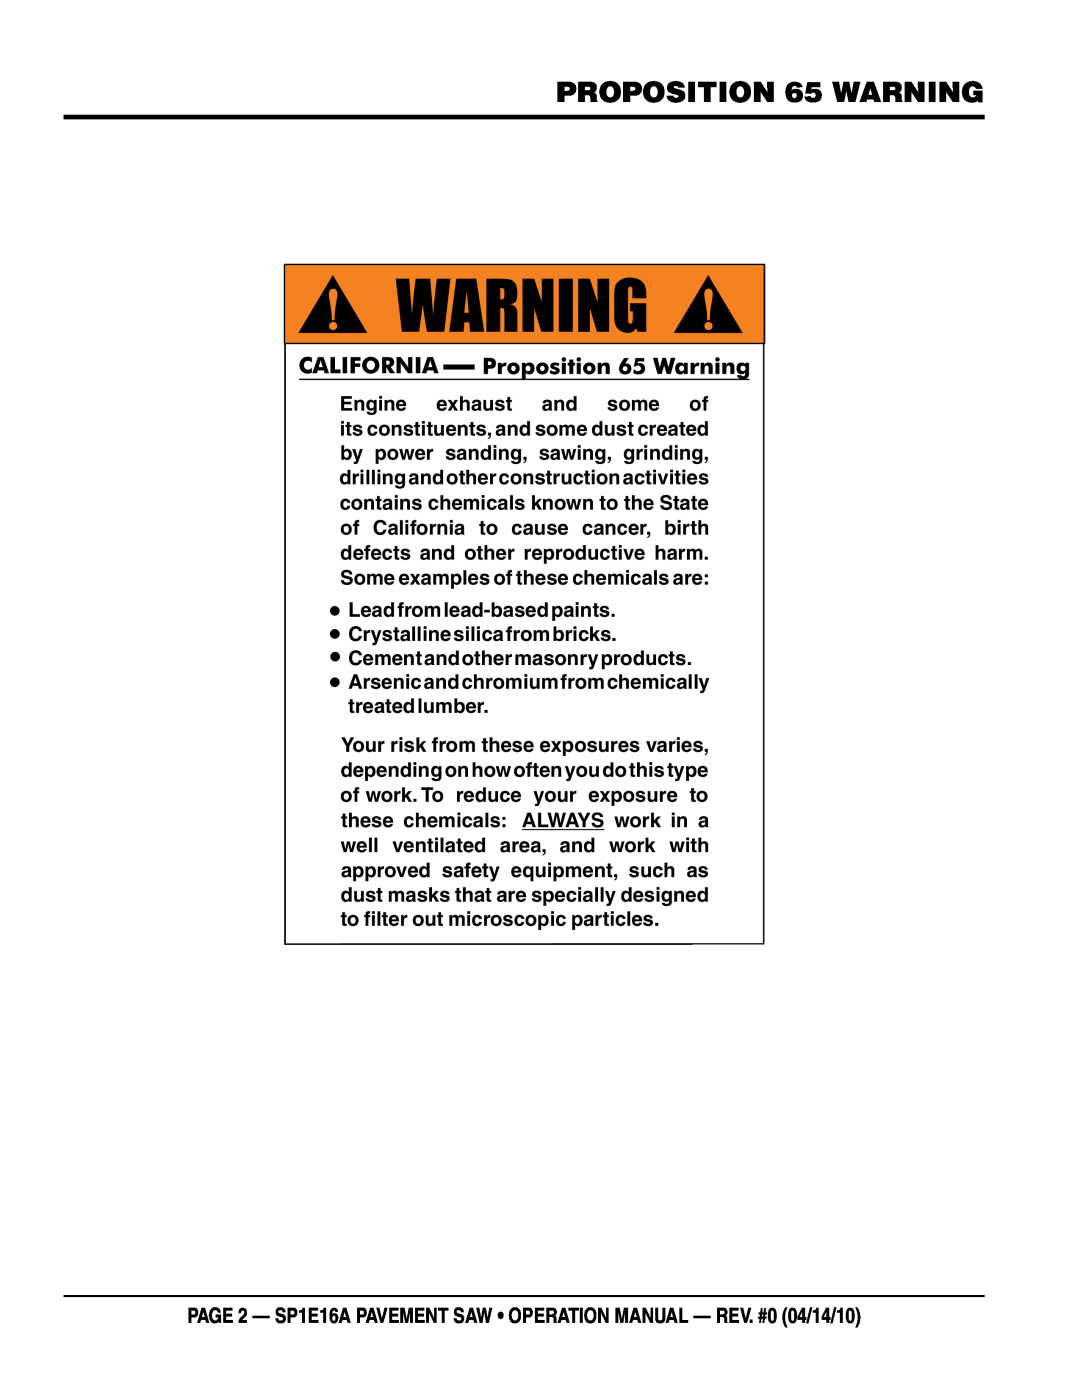 Multiquip SP1E16A operation manual proposition 65 warning 